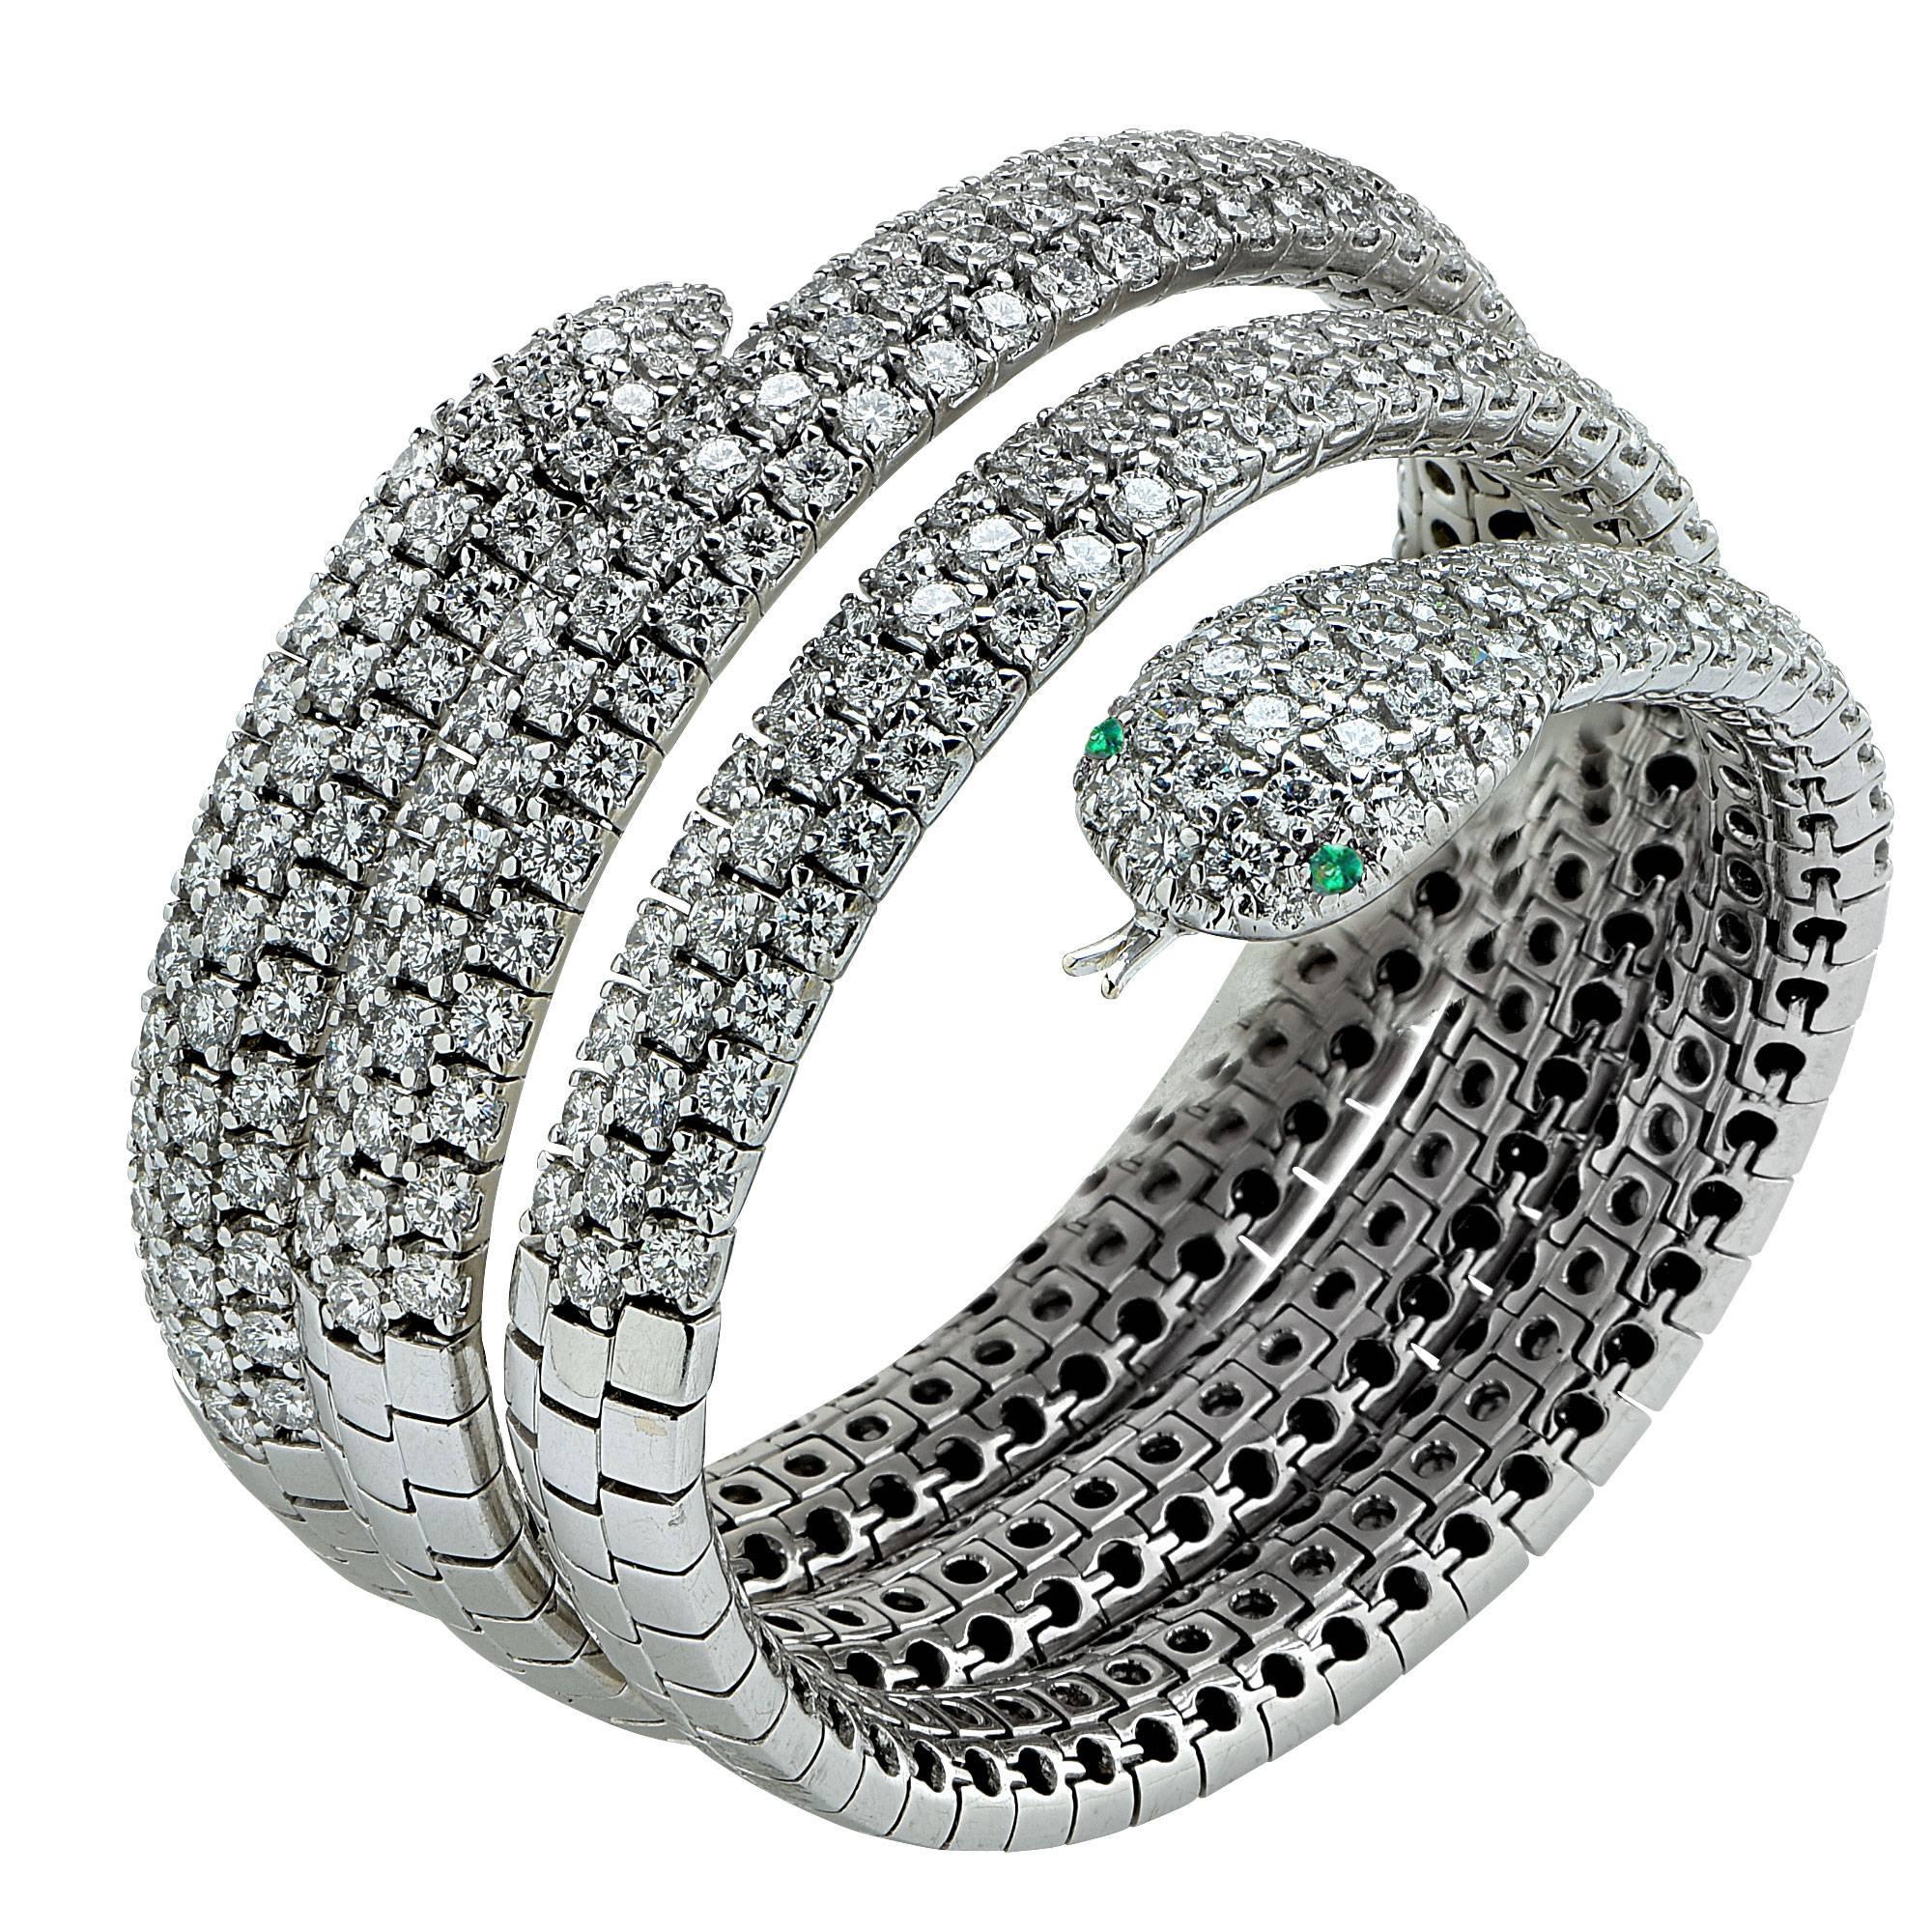 Feast your senses on this superbly crafted 18k white gold snake bangle adorned with round brilliant cut diamonds weighing approximately 24cts total, G color VS clarity. This superb bracelet glides over your wrist and envelopes it in silky smooth